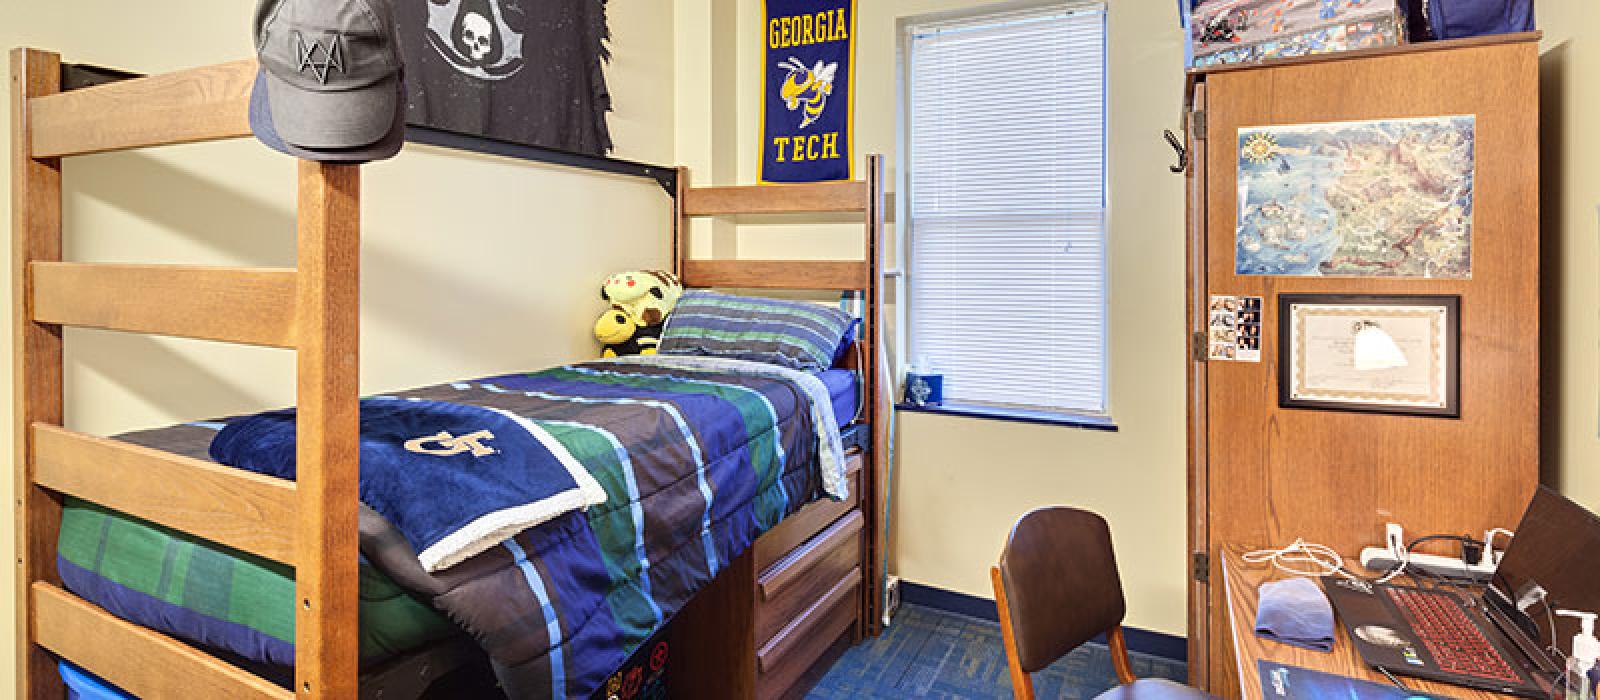 Furnished bedroom with extra student decorations.